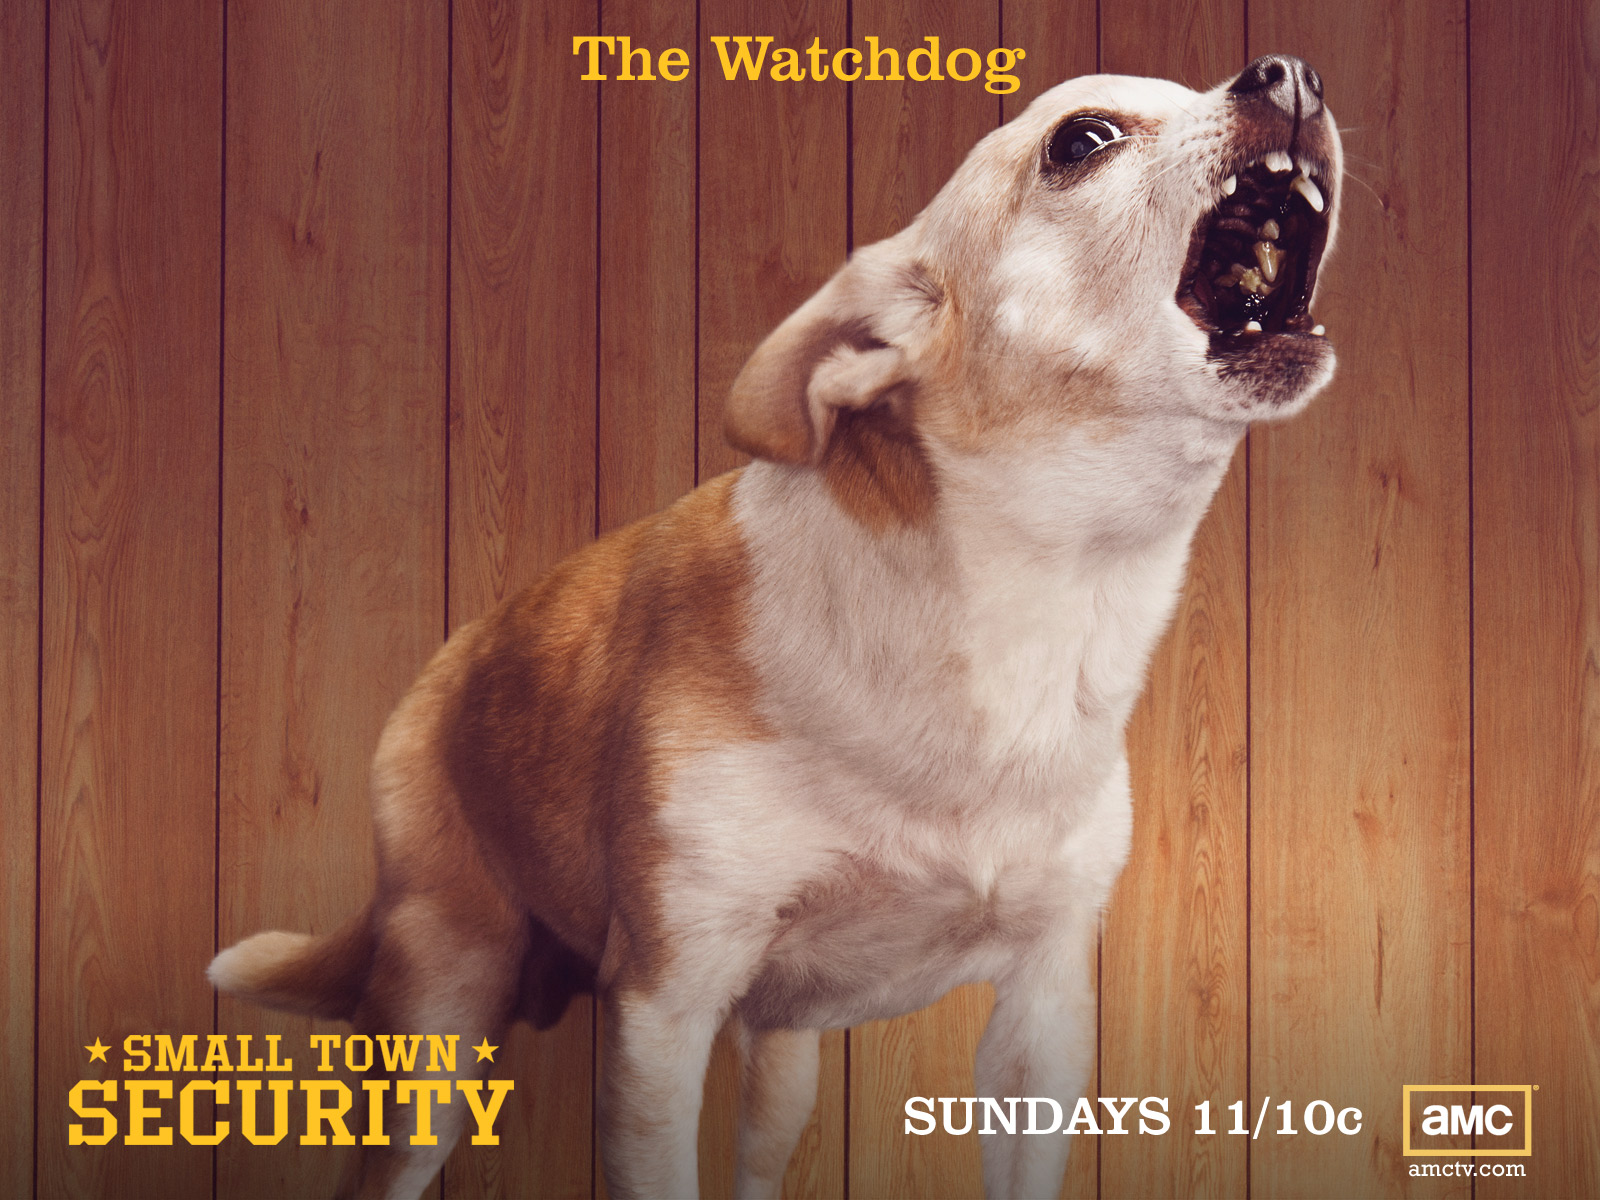 tv show, small town security, dog, security